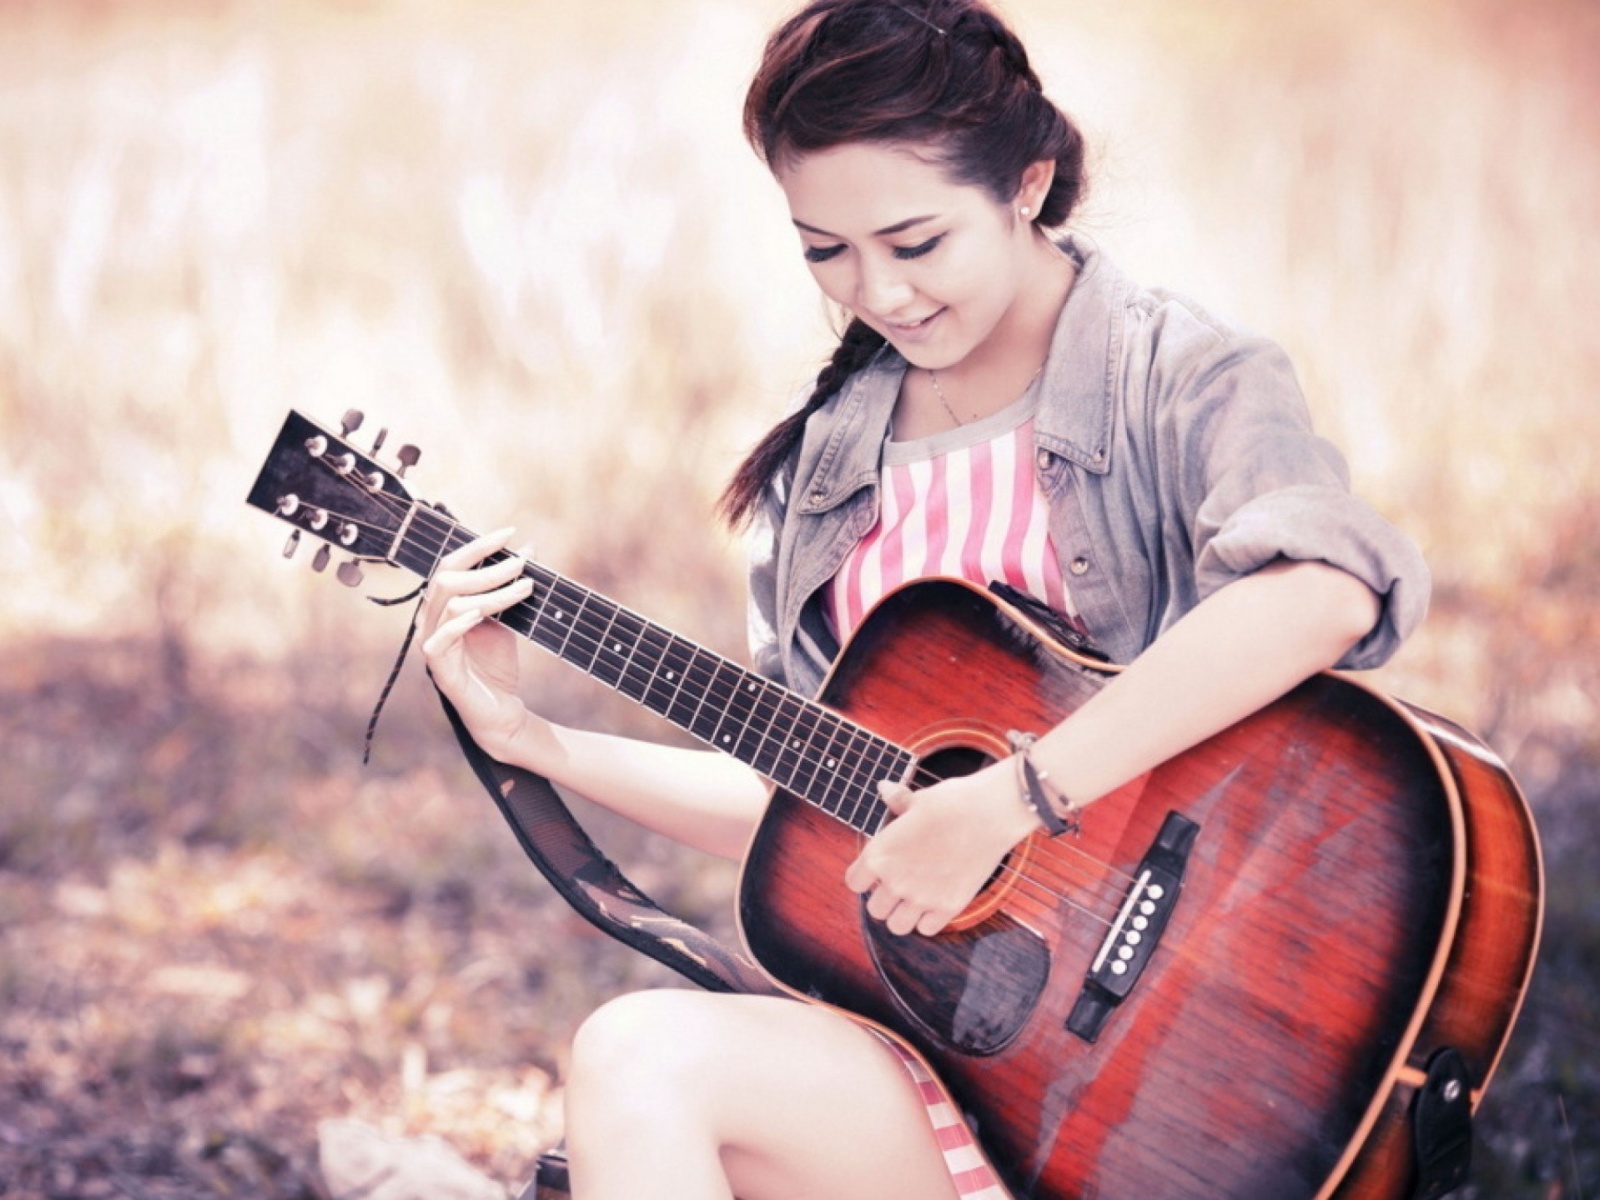 Chinese girl with guitar wallpaper 1600x1200